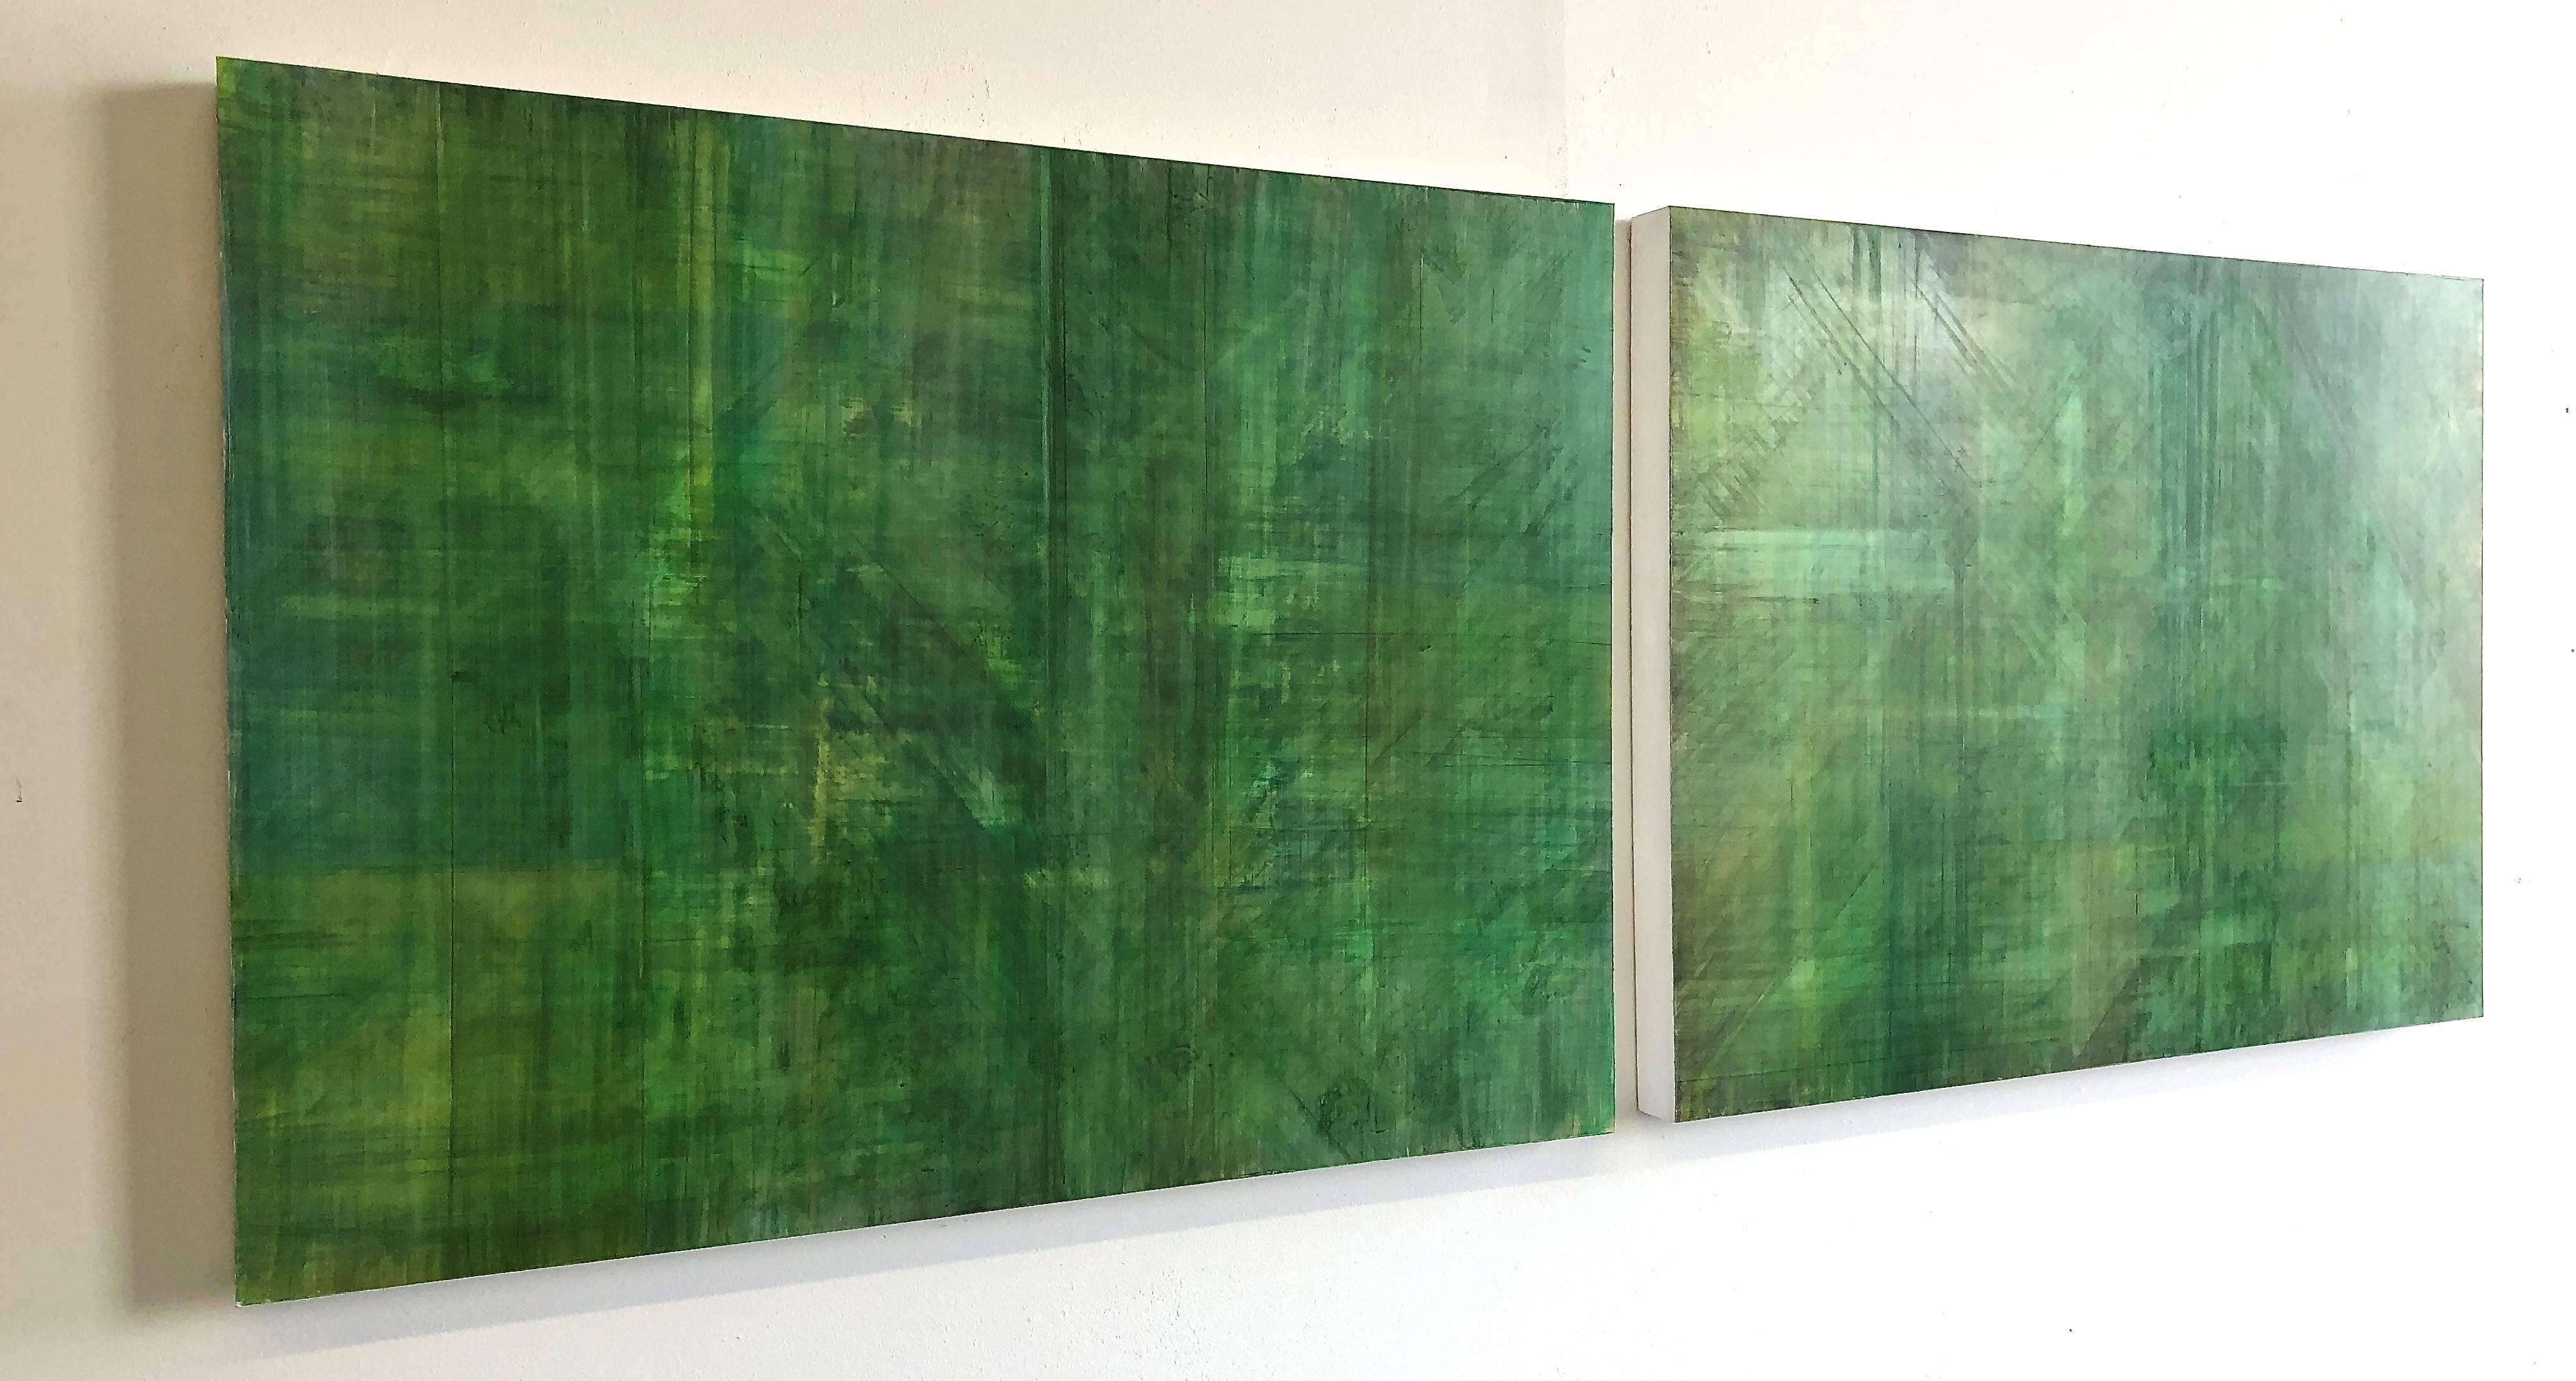 C14-10 (Minimalist Green Wall Sculpture in Two Panels, Diptych) - Painting by Ginny Fox